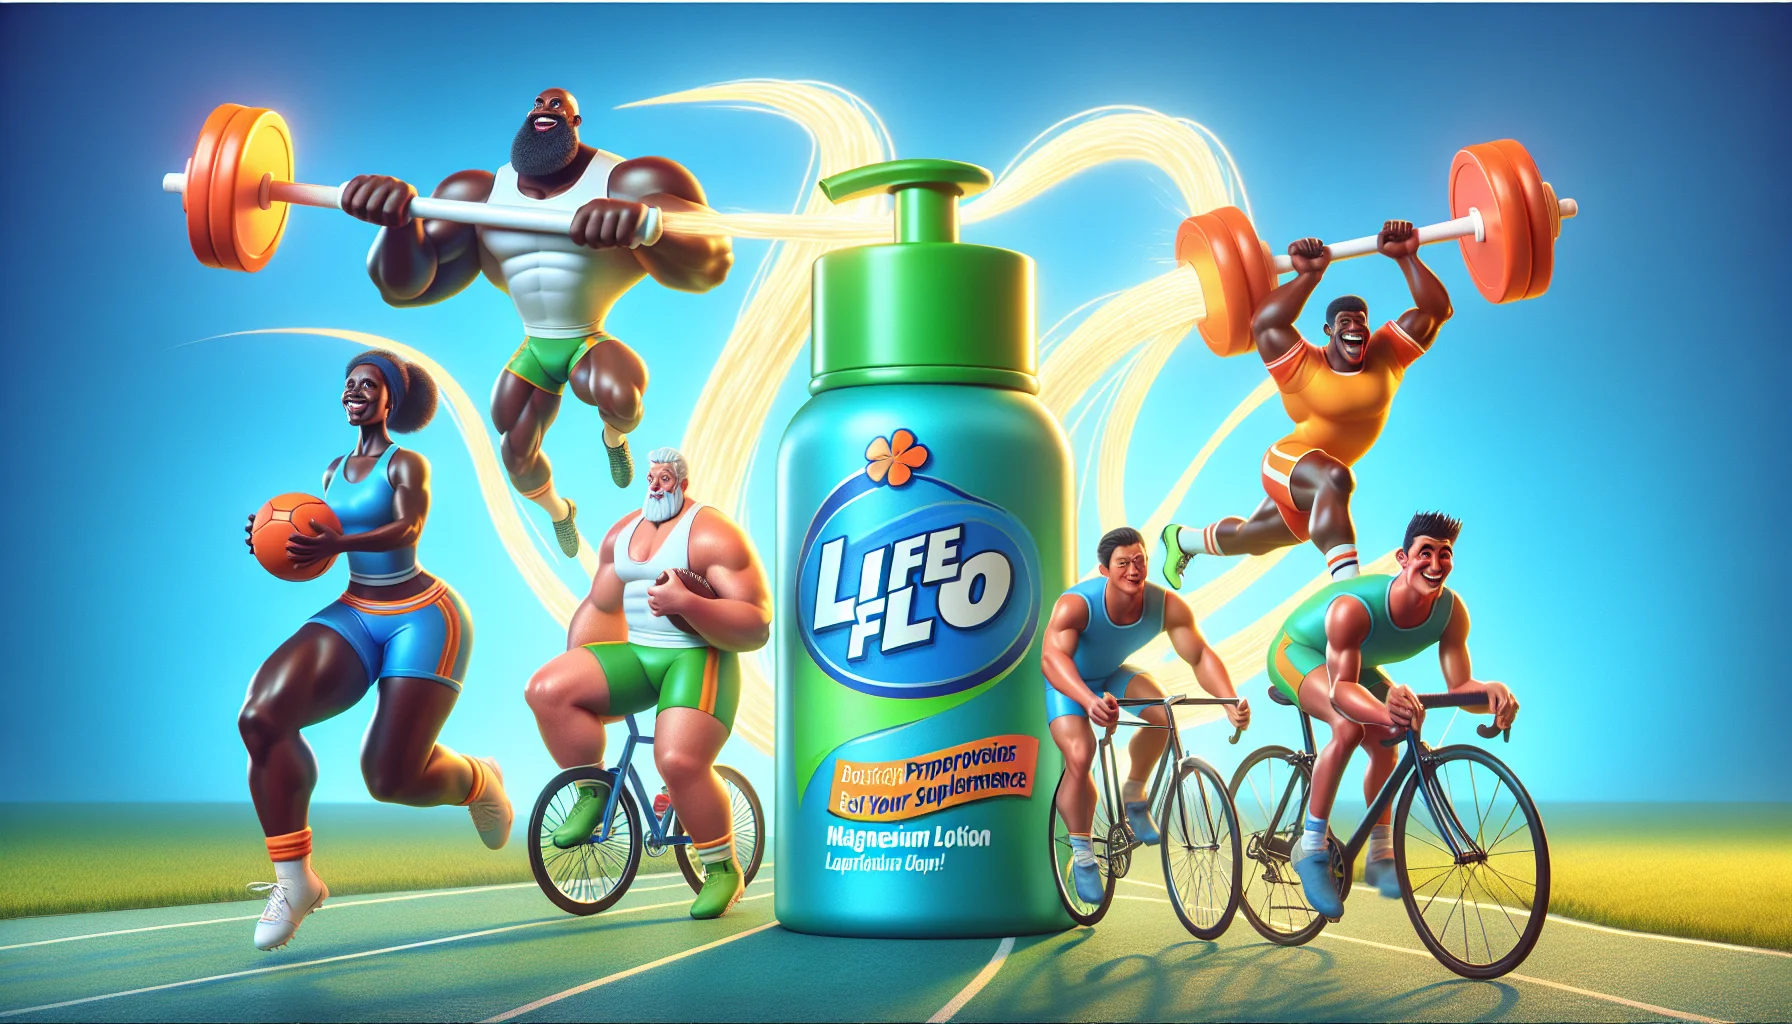 Create a vibrant and humorous image of an exaggerated sports scenario showcasing the benefits of using supplements, represented here by a fictional 'Life Flo Magnesium Lotion'. We see a diverse group of athletes - an African Black female weightlifter, a Caucasian male footballer, an Asian bicyclist, and a Middle Eastern male marathon runner - each humorously experiencing dynamic improvements in their performance after using the lotion. A large, cartoonish depiction of the lotion is at the center, with comical 'power waves' emanating from it towards the athletes. Remember, this setting should be vivid and engaging.